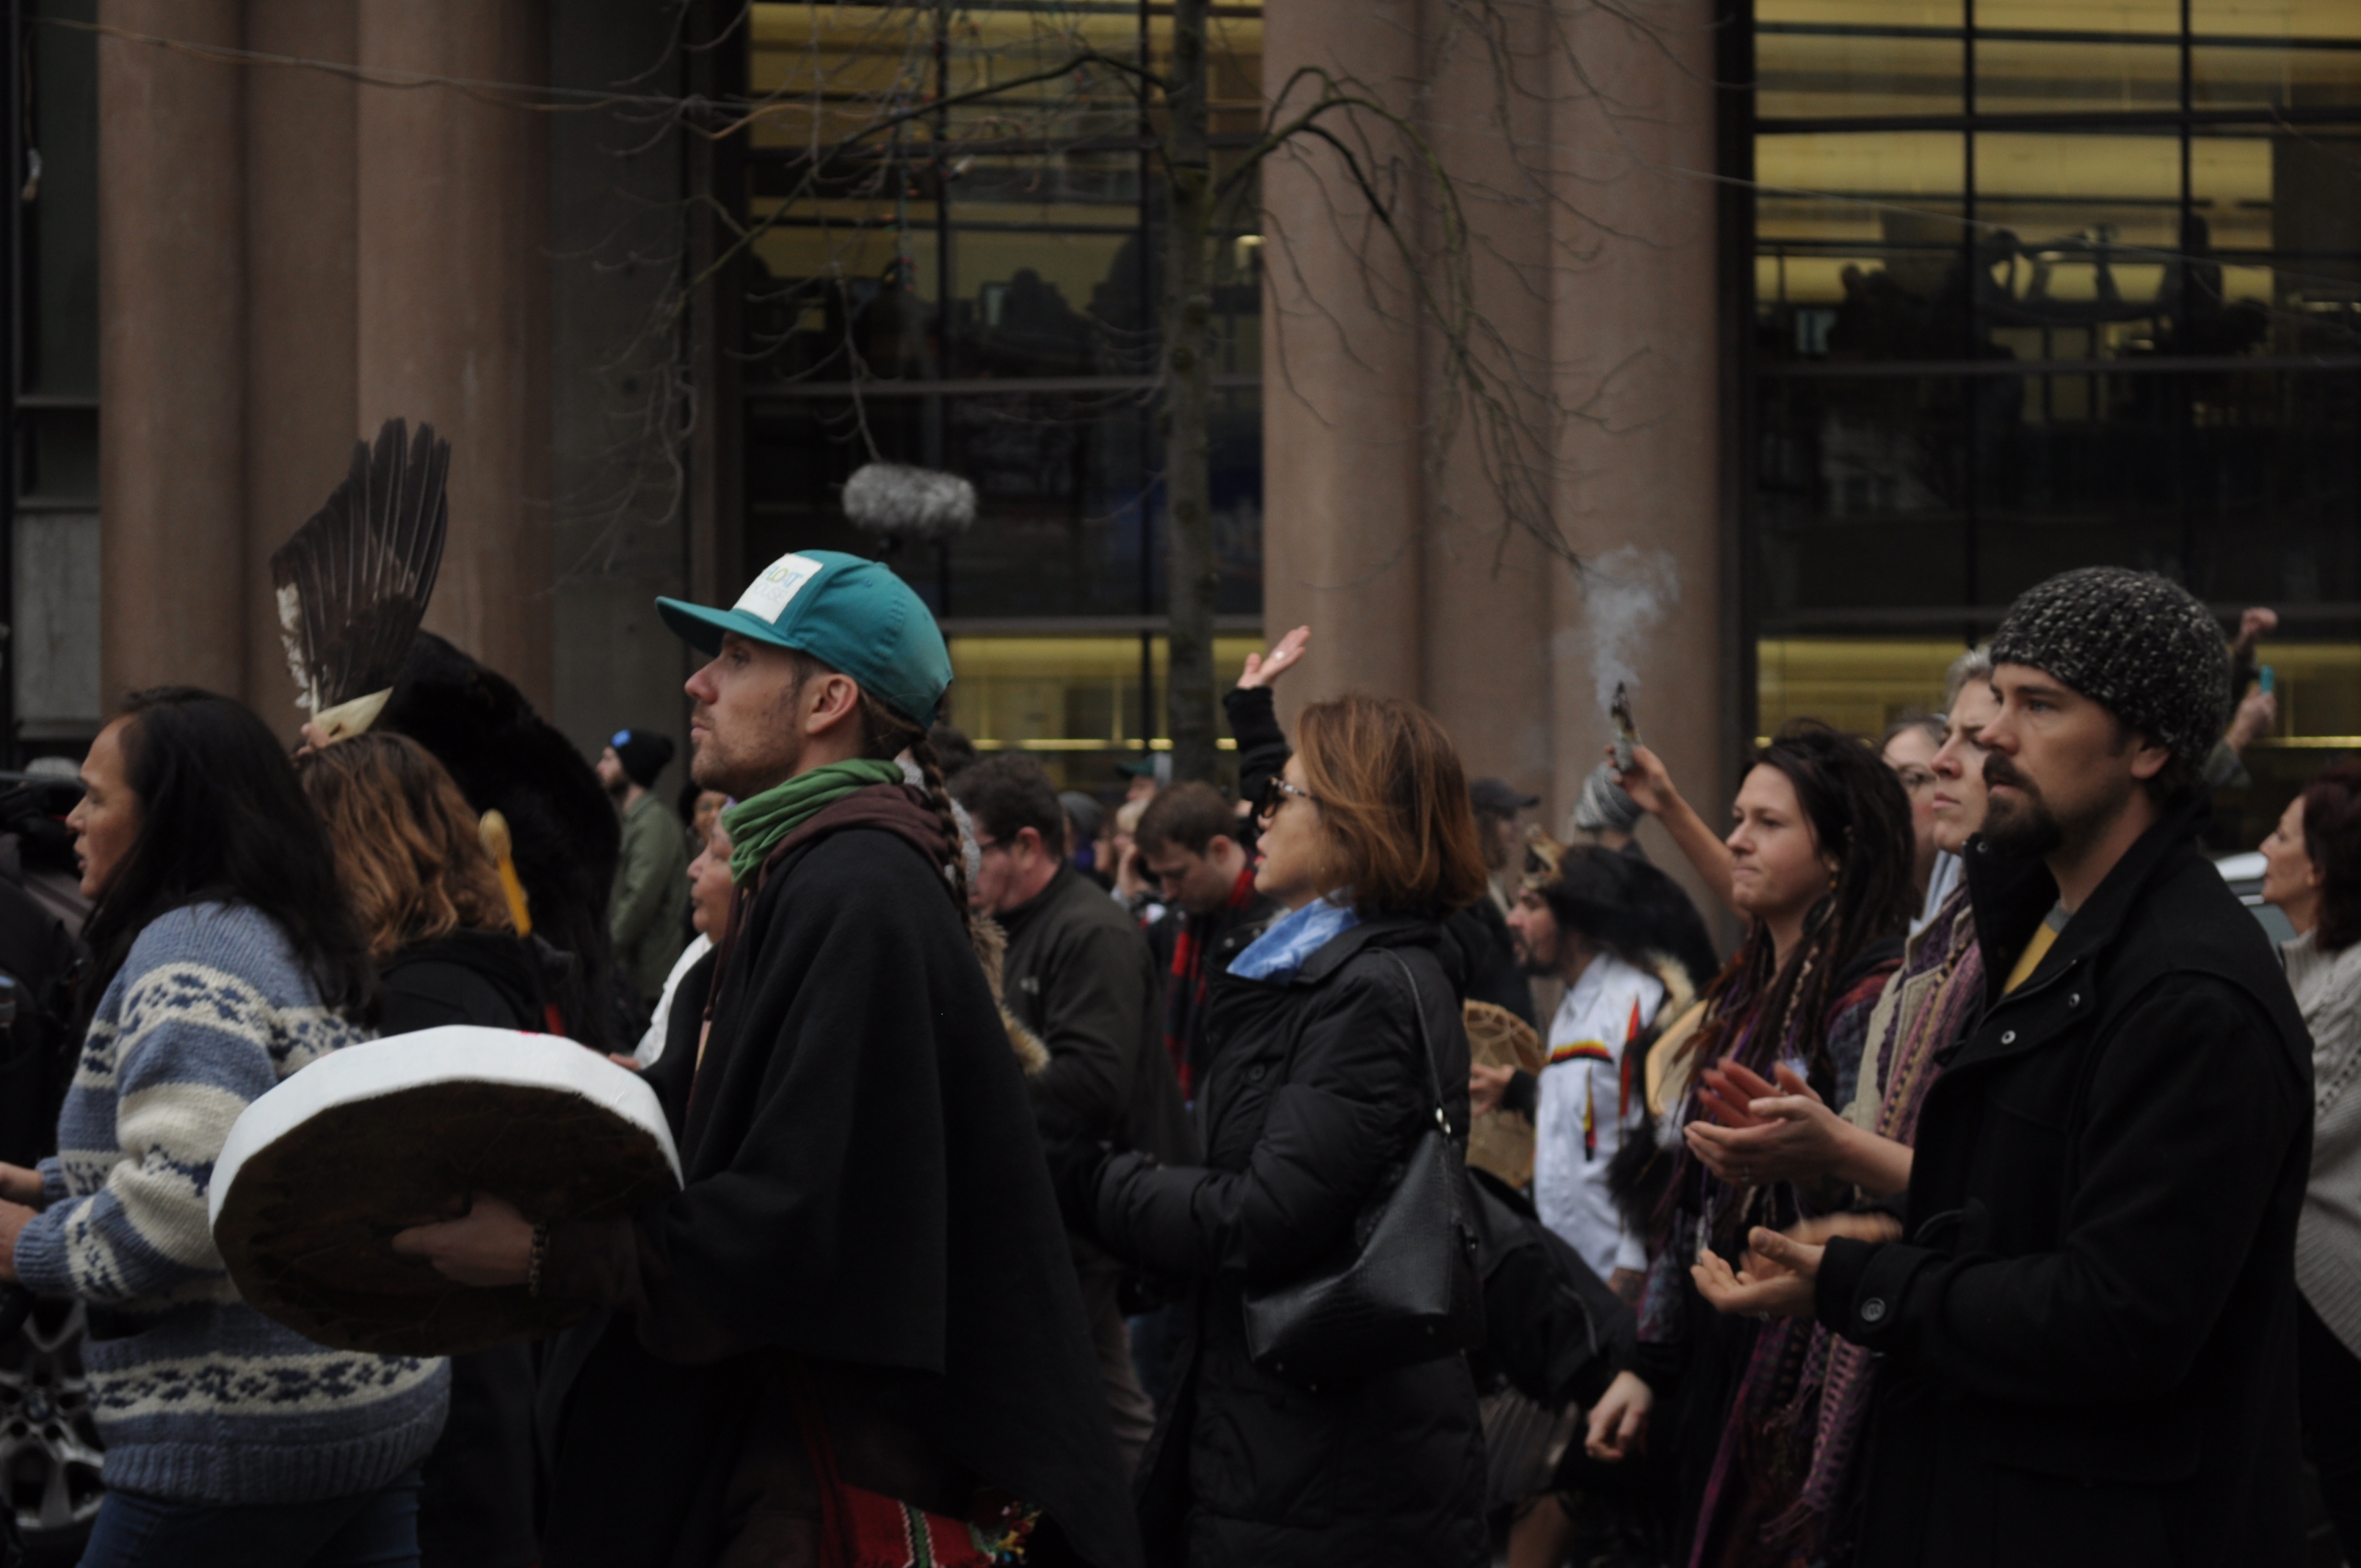 In the background, sage stick smoke during the Stop Kinder Morgan March Sep. 19th 2016